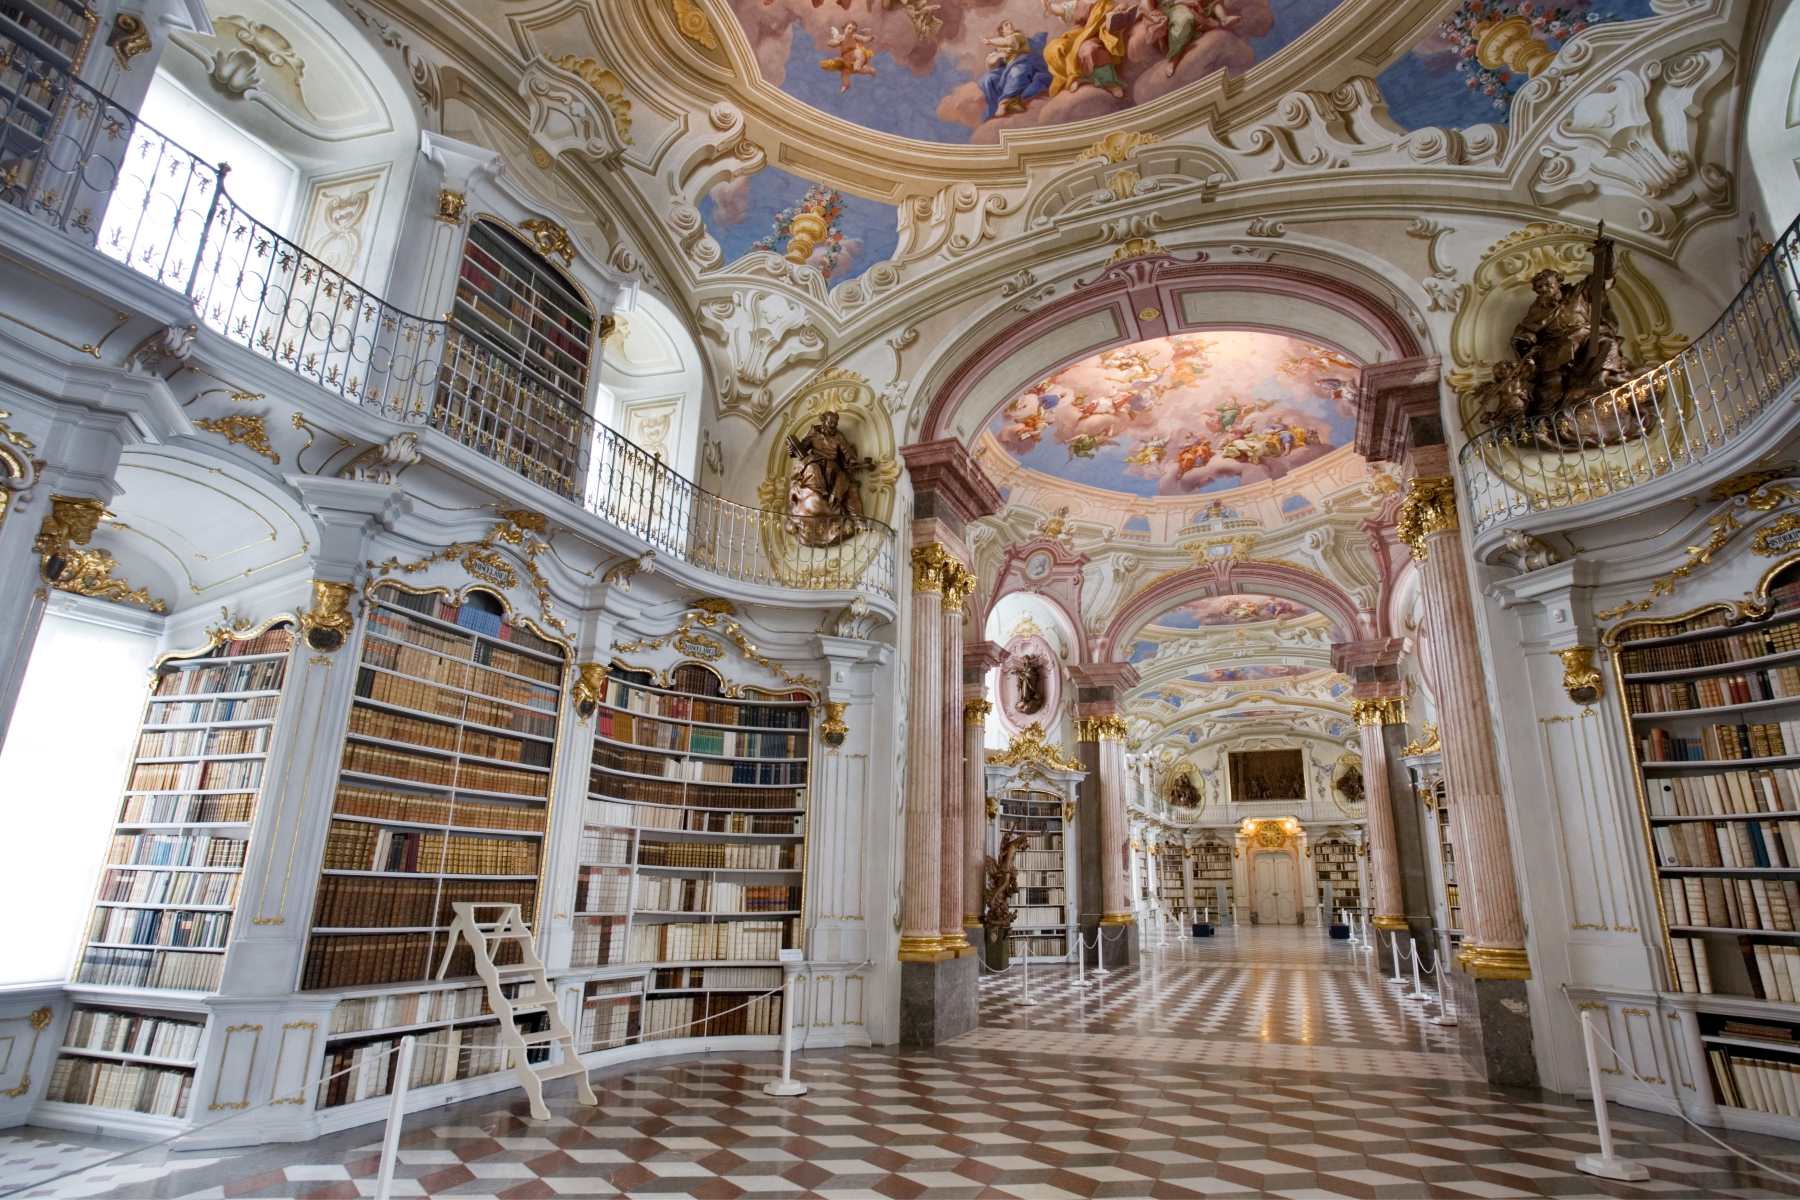 8-mind-blowing-facts-about-monastic-library-of-admont-abbey